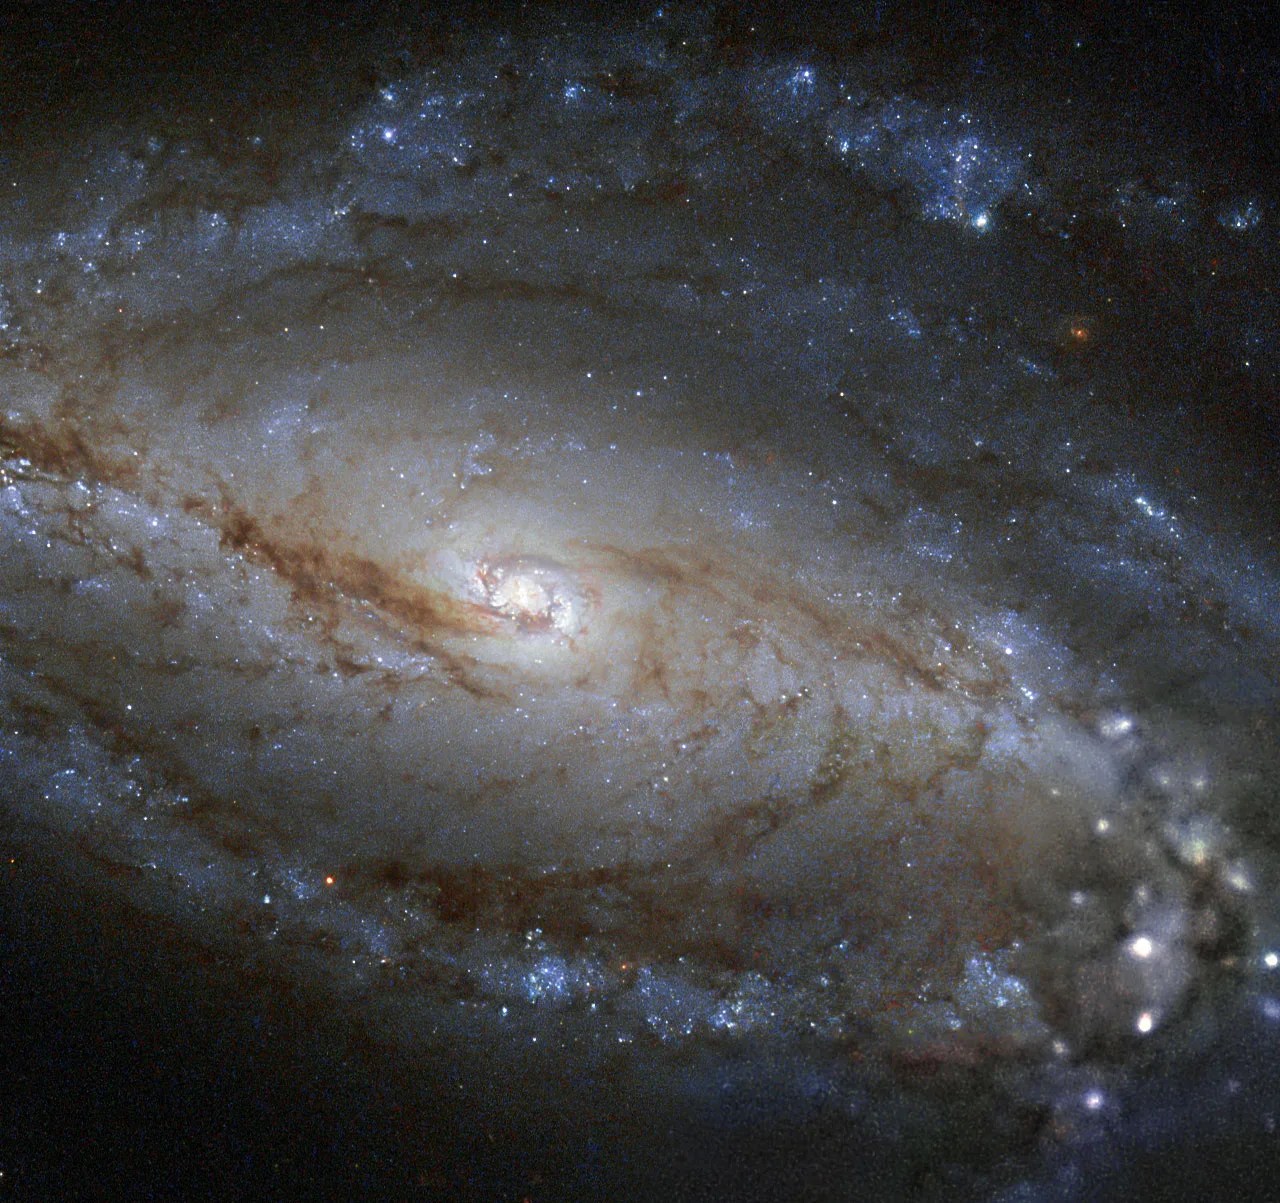 A spiral galaxy with a glowing bright white core, ribbons of orange-brown flowing out from its center, and spiral arms of blue-white and pink stars.